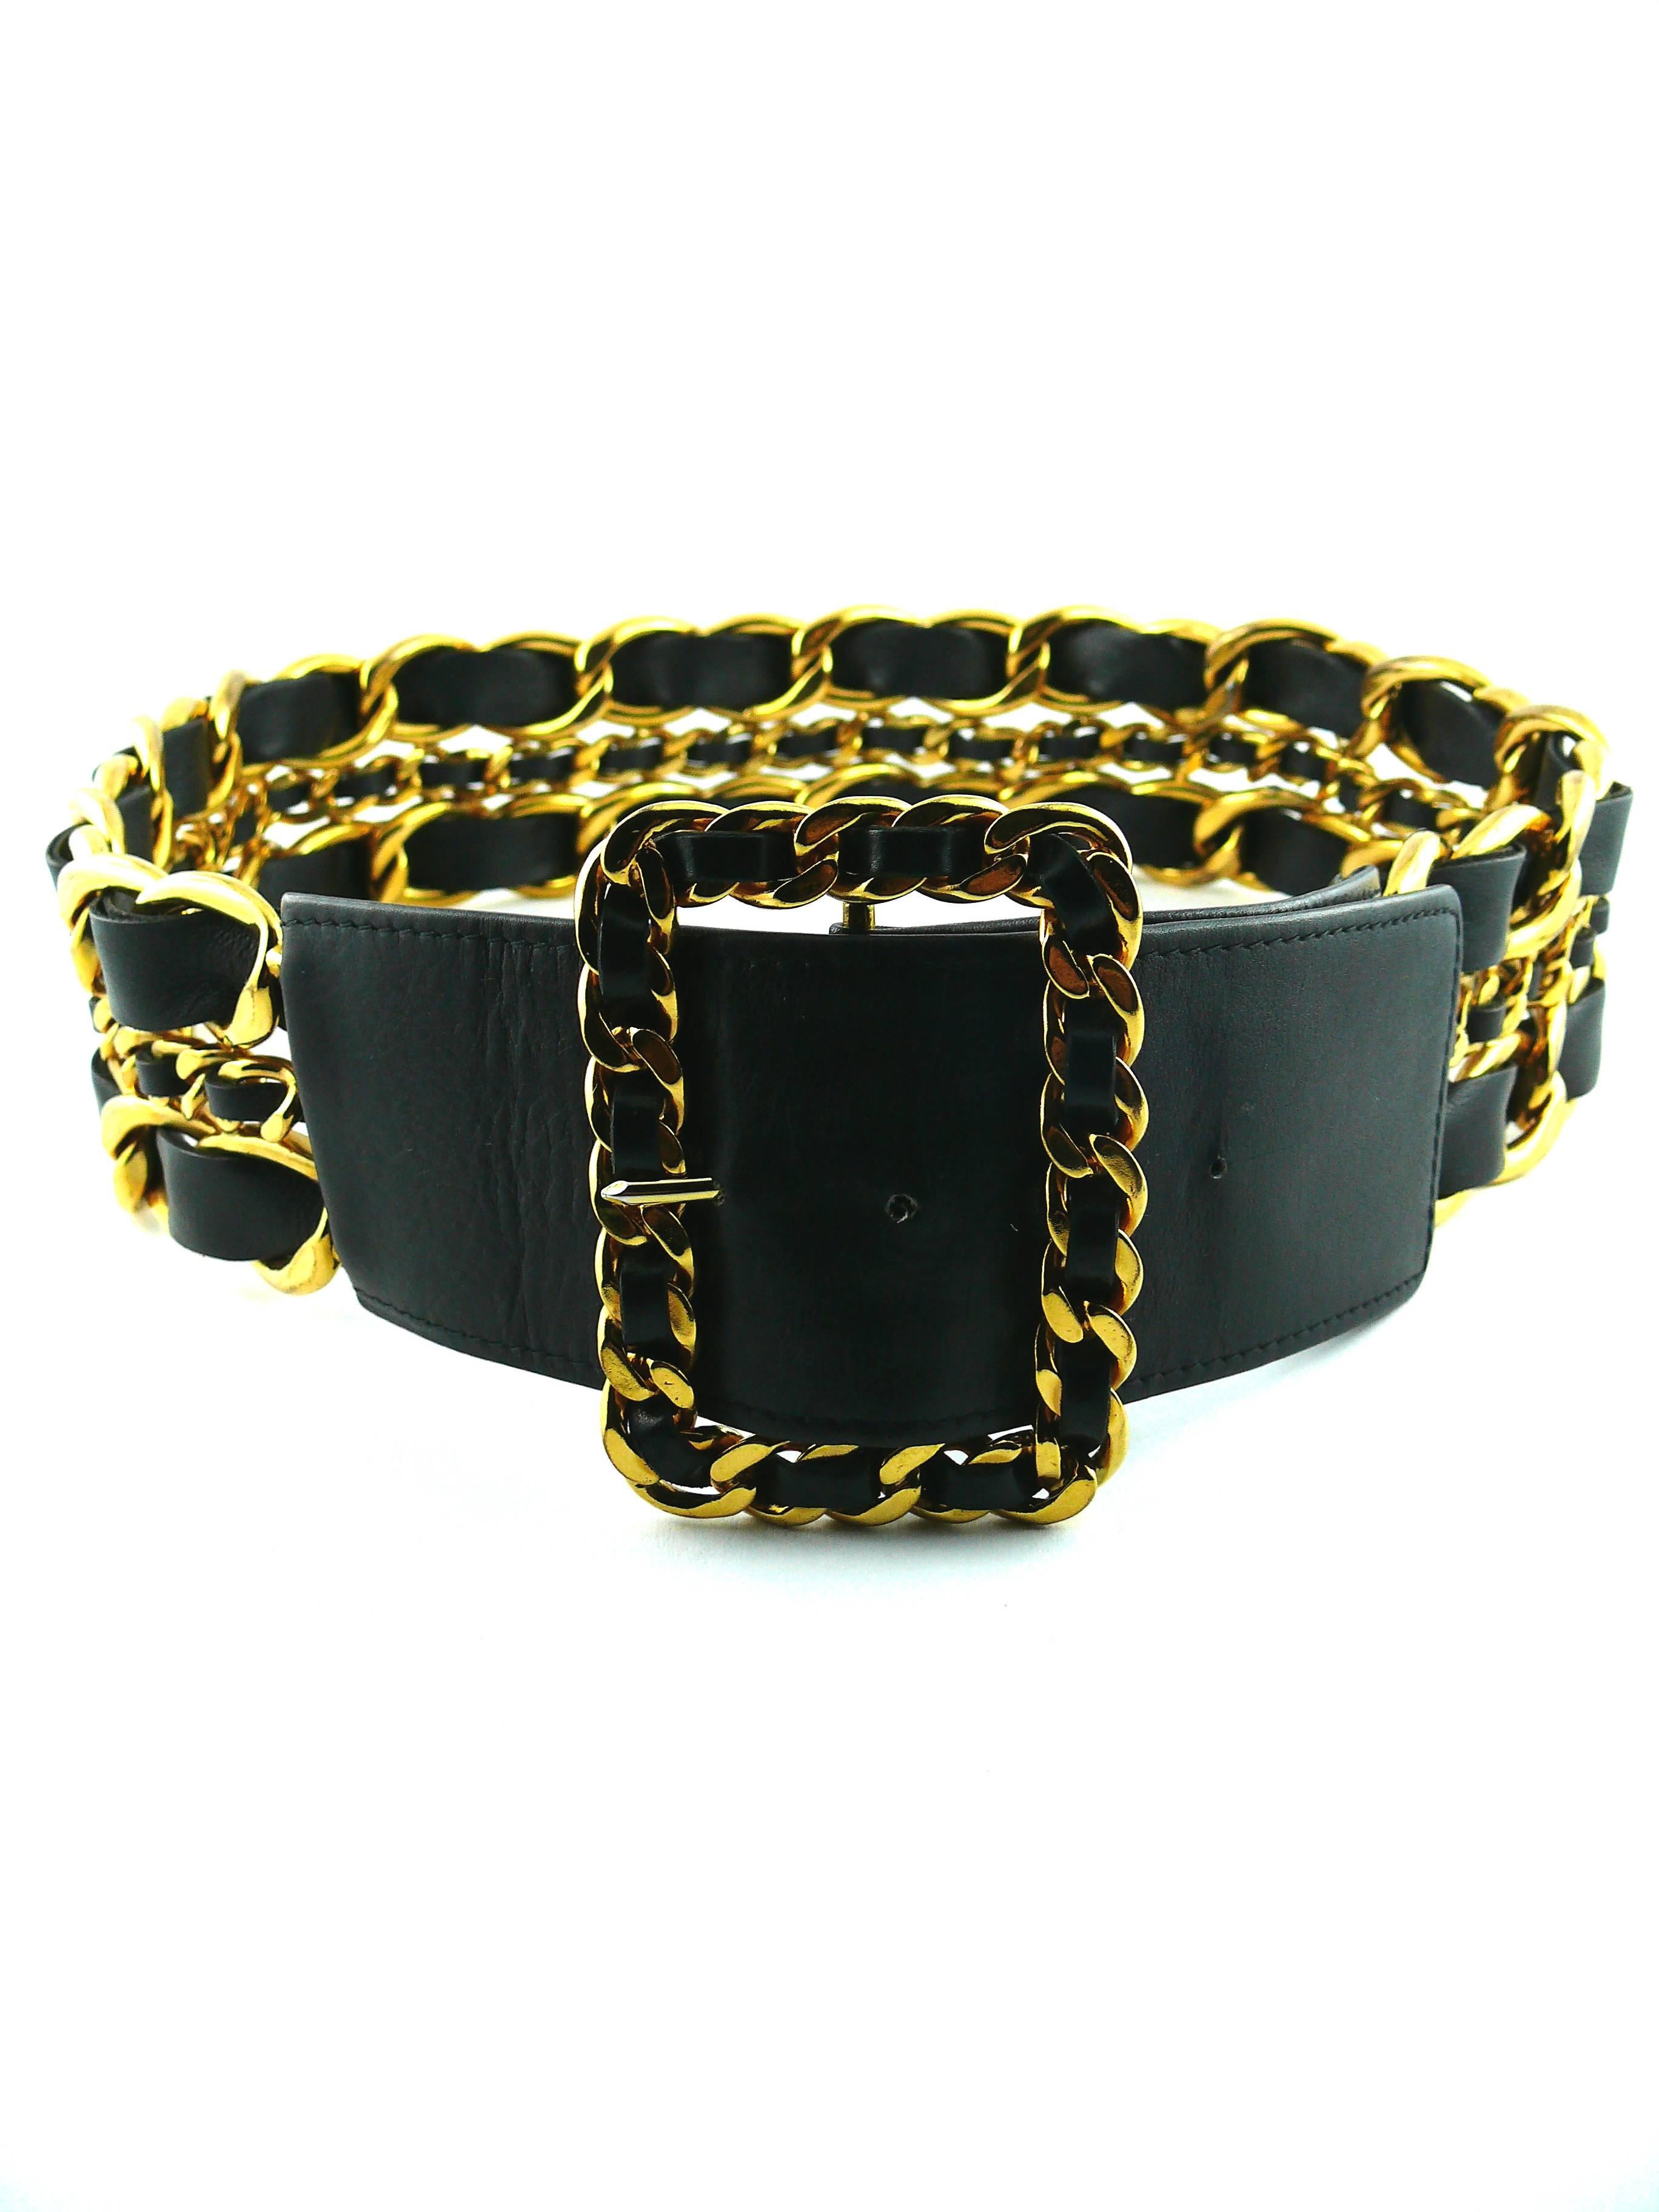 CHANEL vintage large iconic belt featuring a massive gold tone chain with woven black lamb skin soft leather.

Marked CHANEL 2 9 Made in France.

Indicated size : 80/32.

Indicative measurements : total length approx. 90 cm (35.43 inches) / length